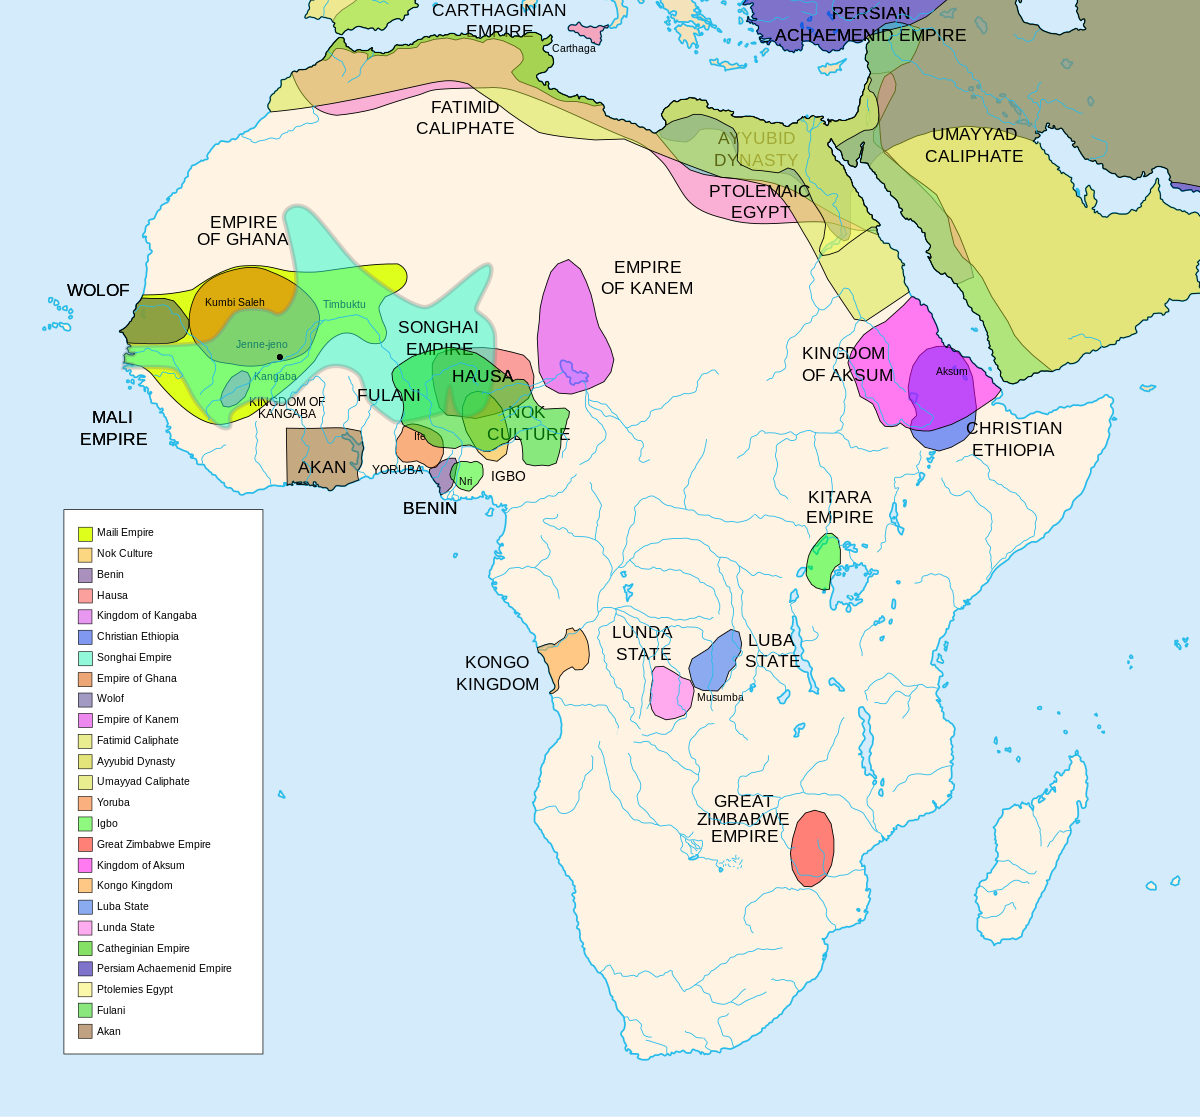 1200px-African-civilizations-map-pre-colonial.svg.png